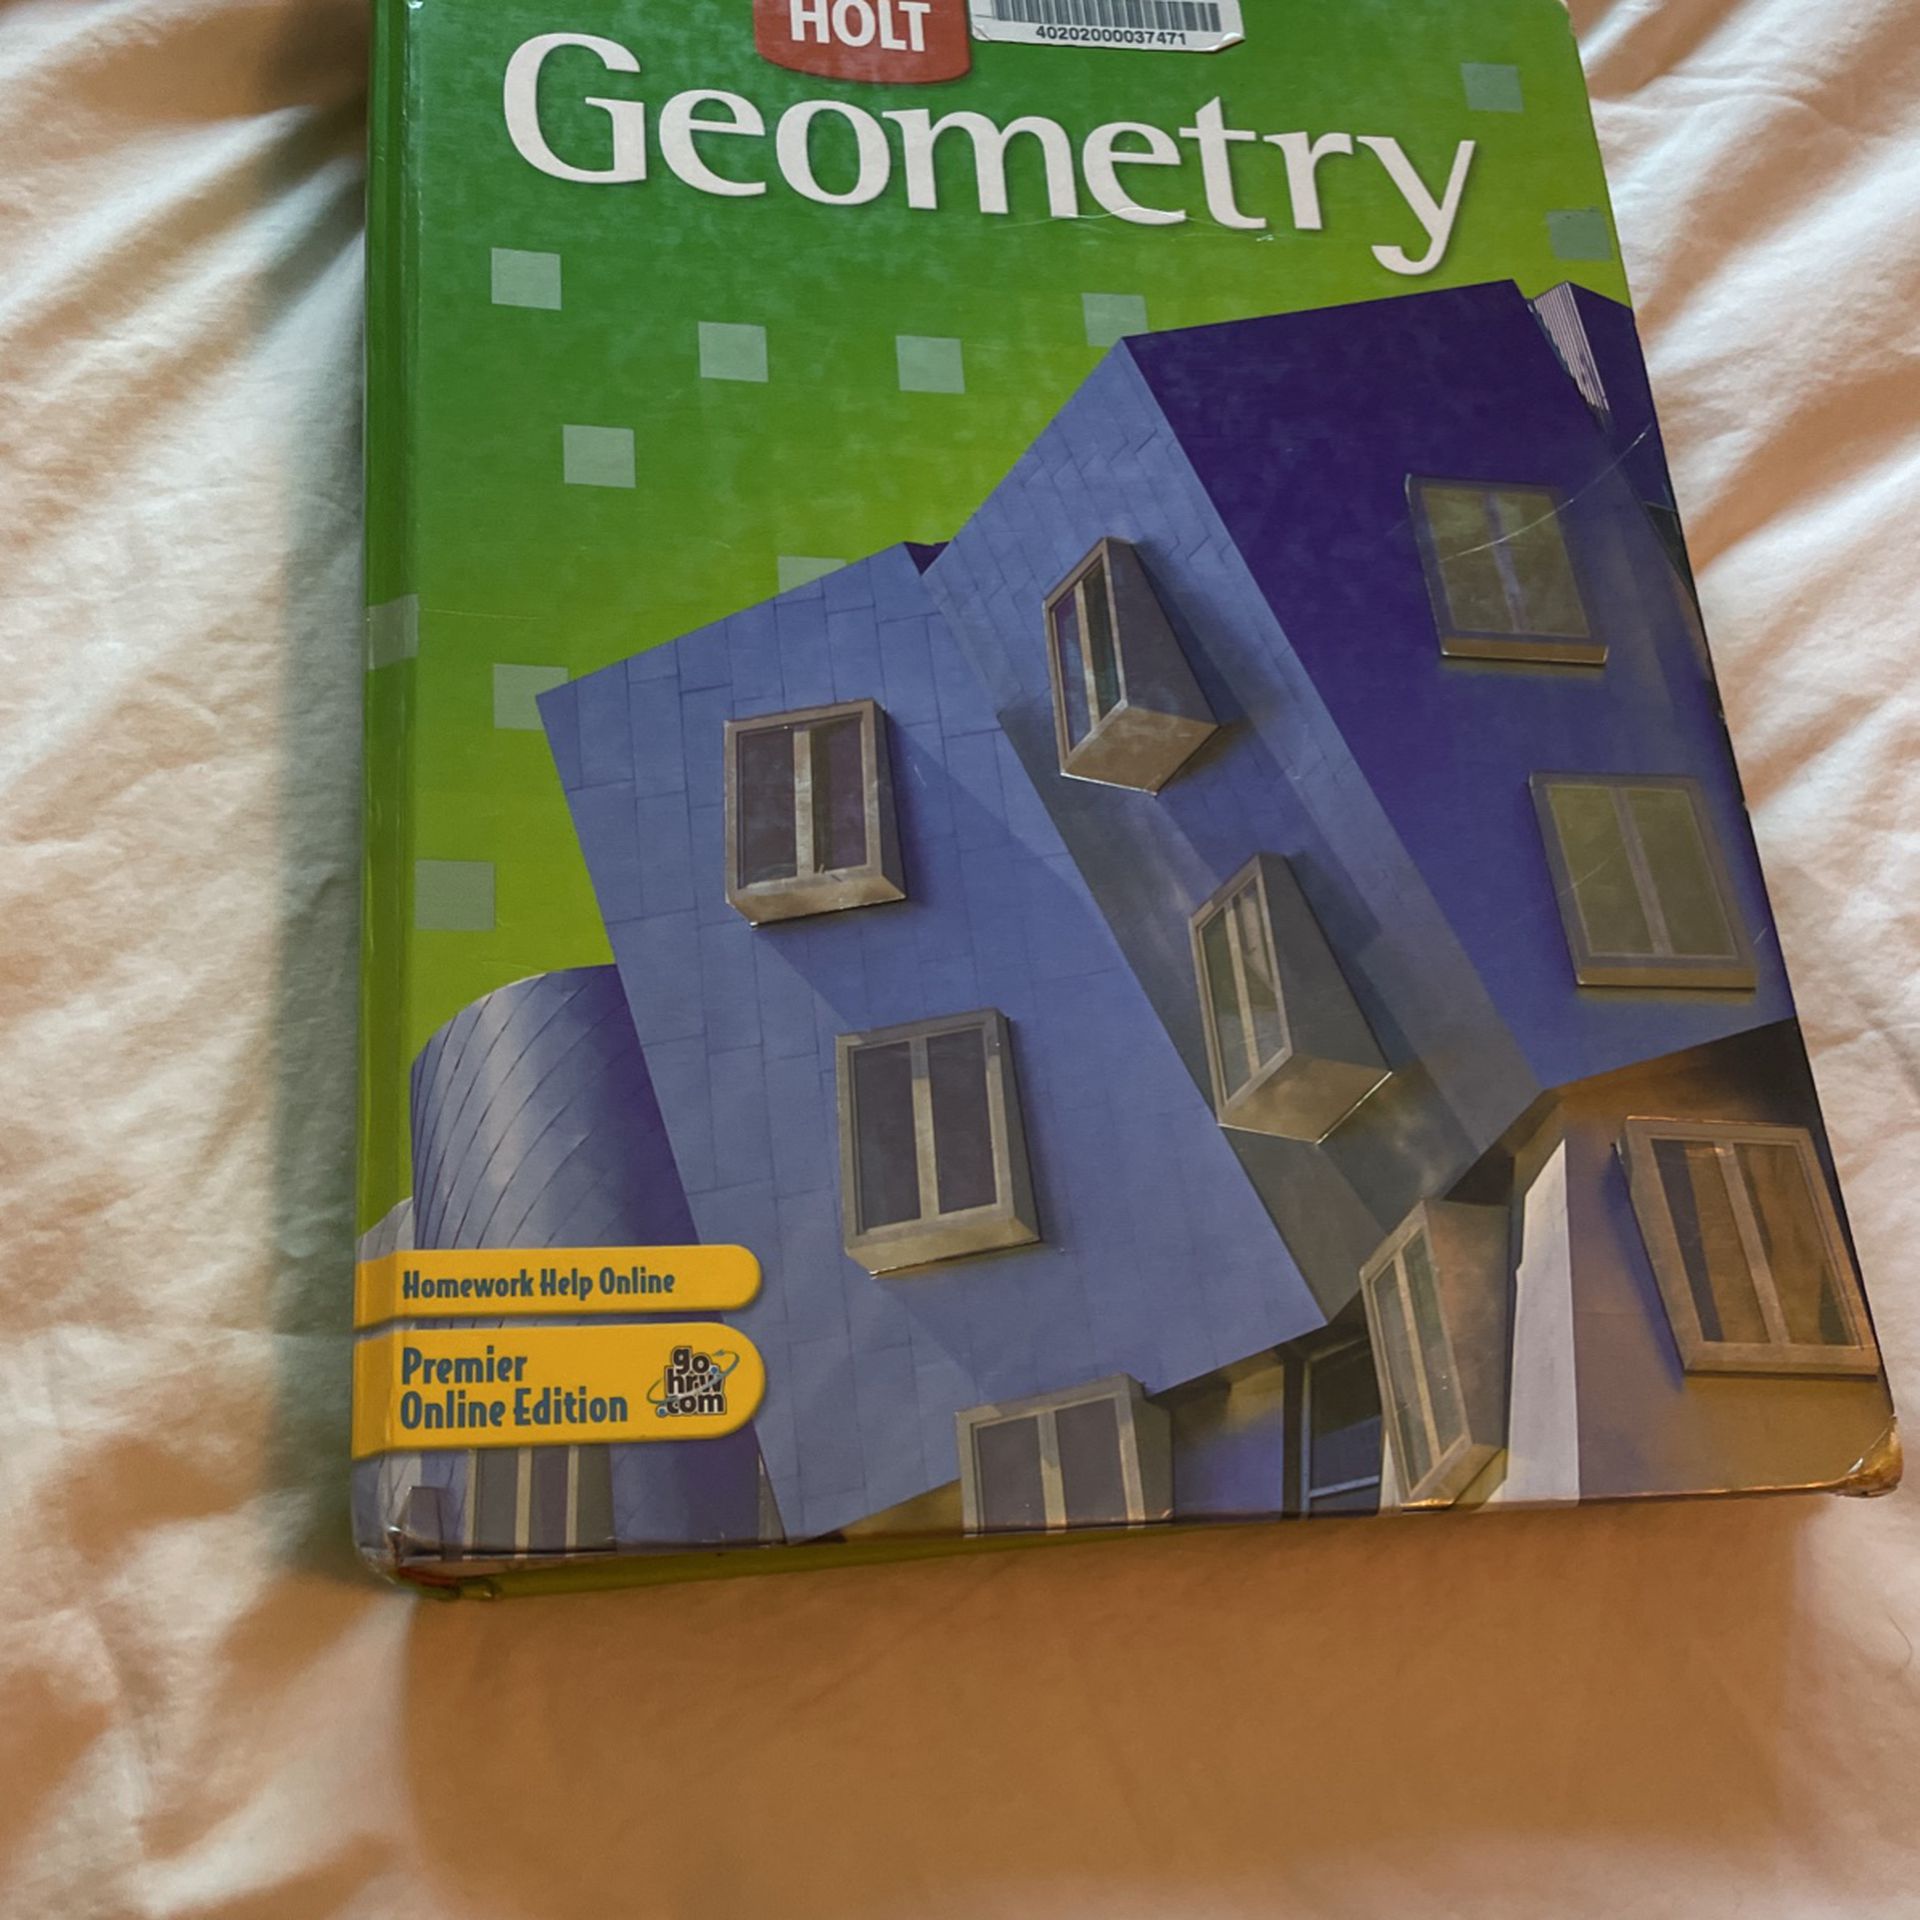 Holy Geometry Text Book